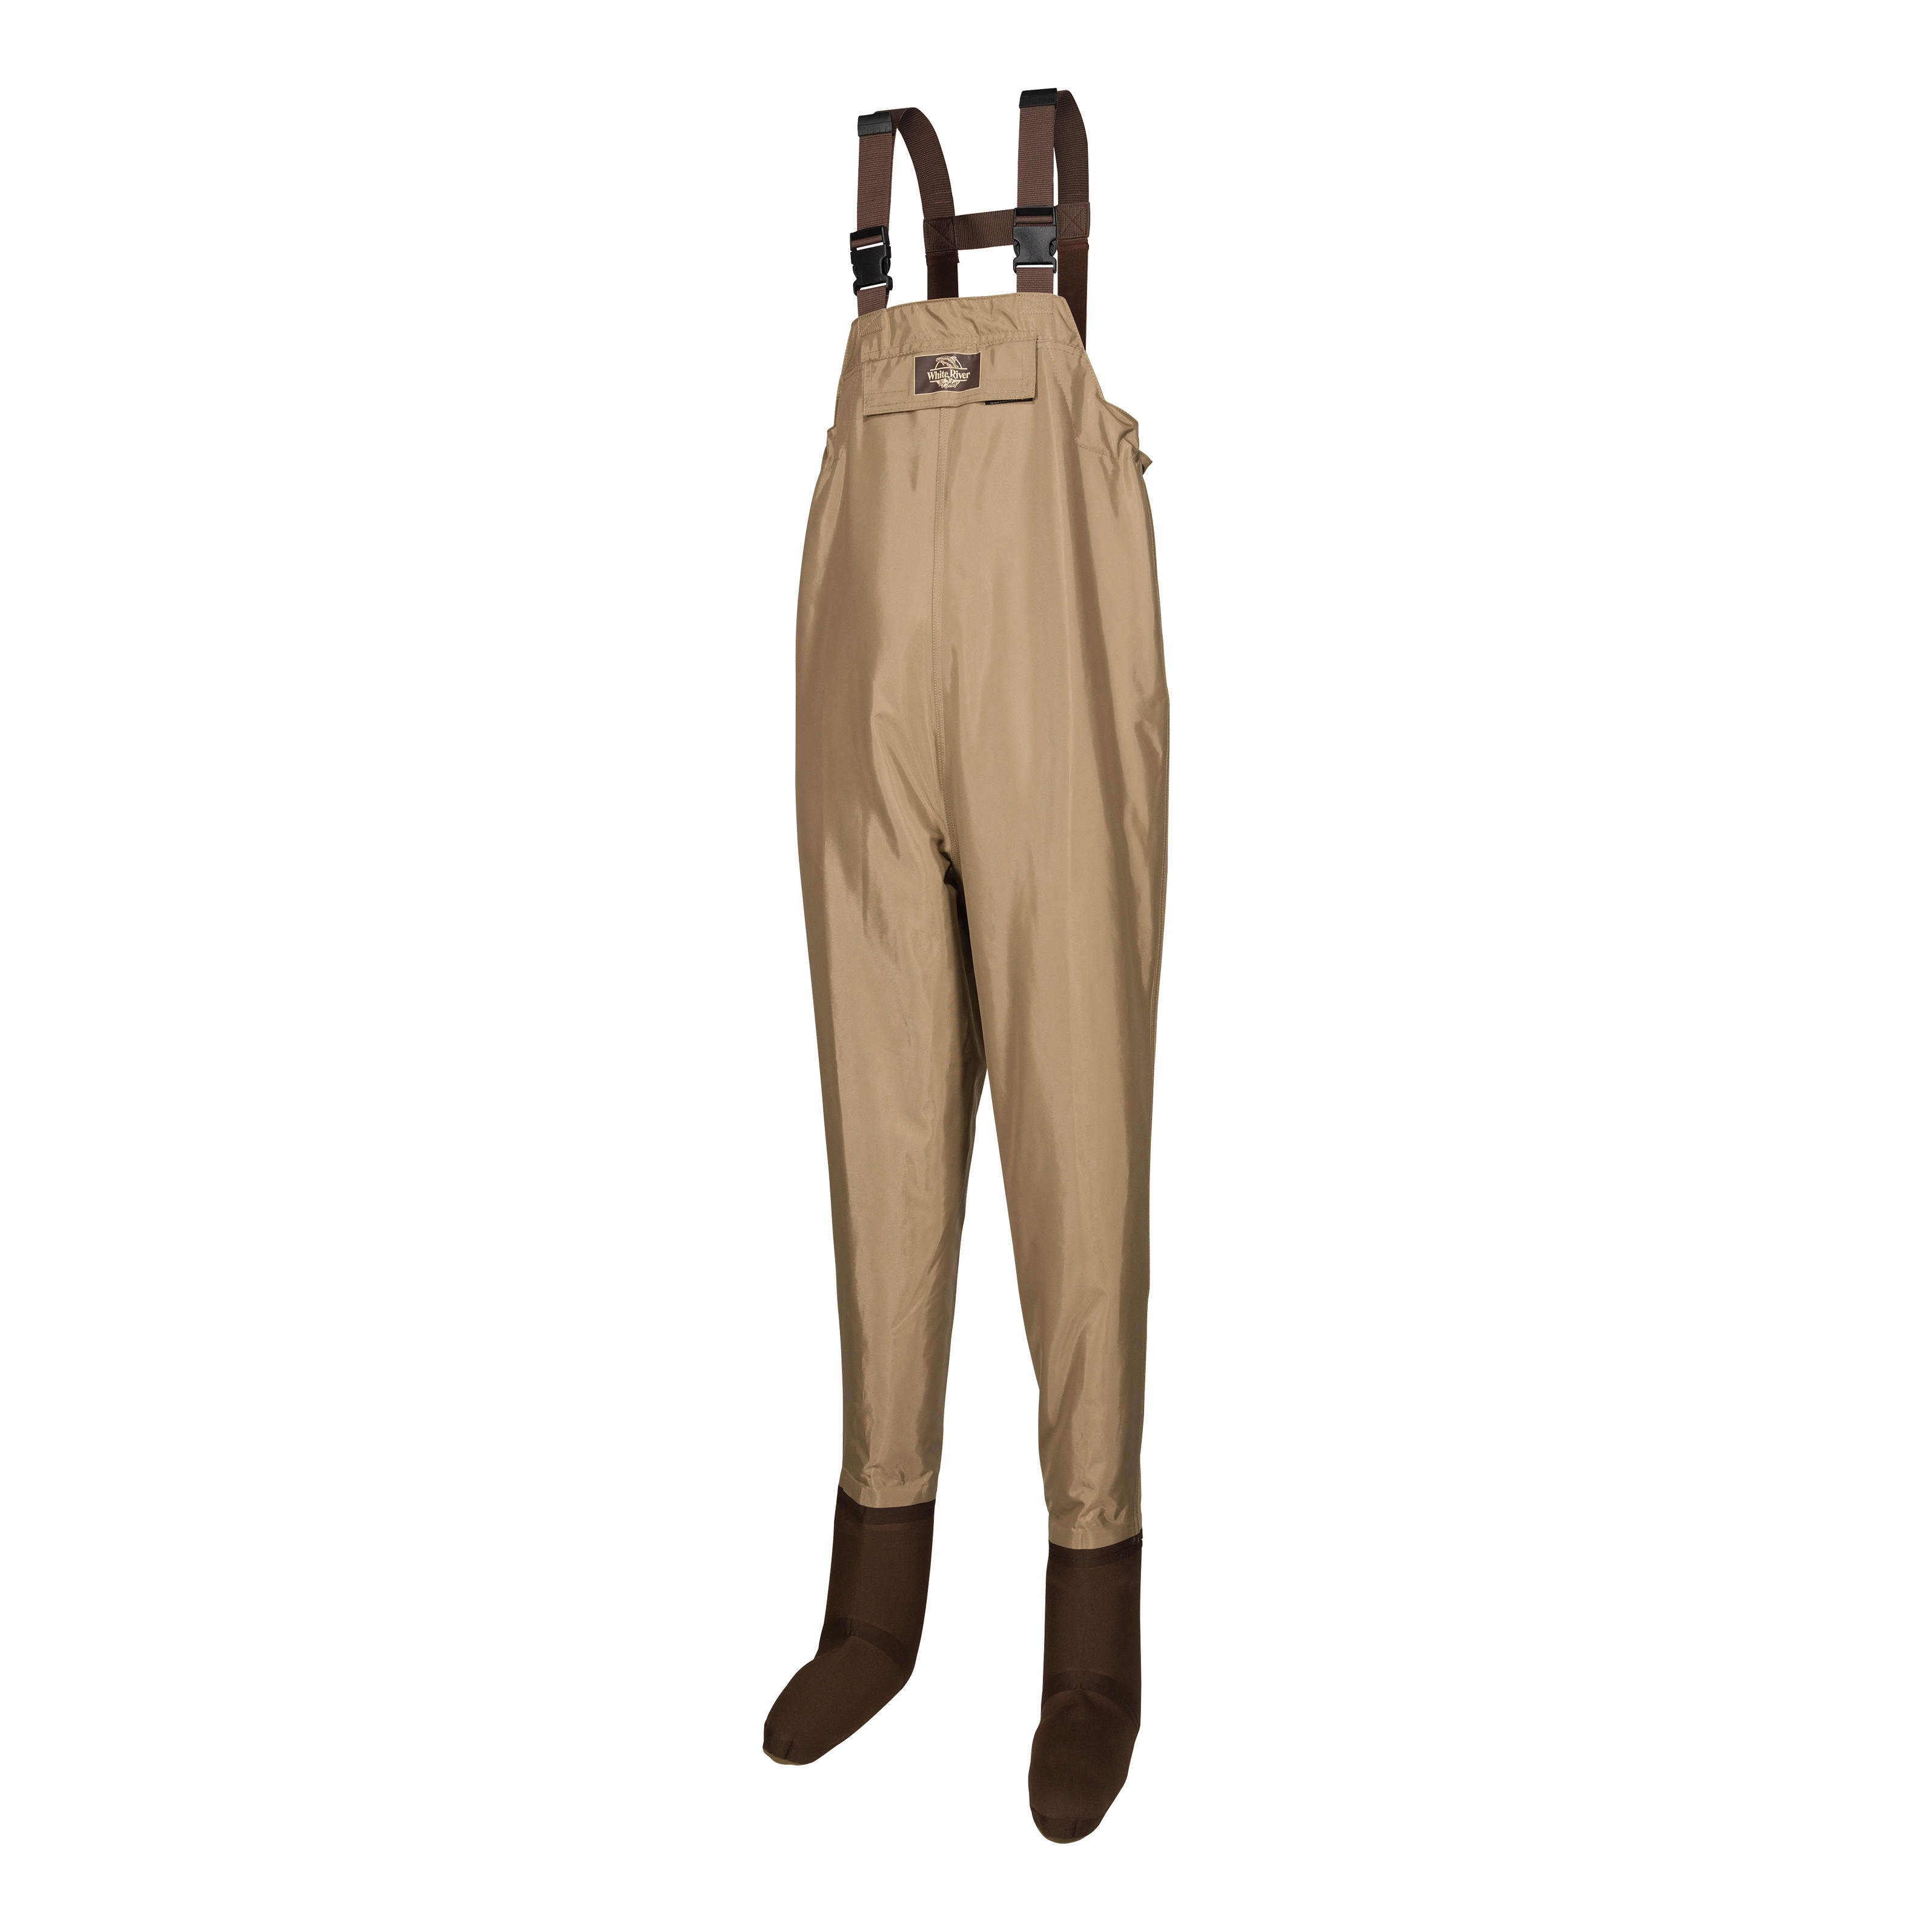 White River Fly Shop® Men’s Three Forks Stocking-Foot Chest Waders